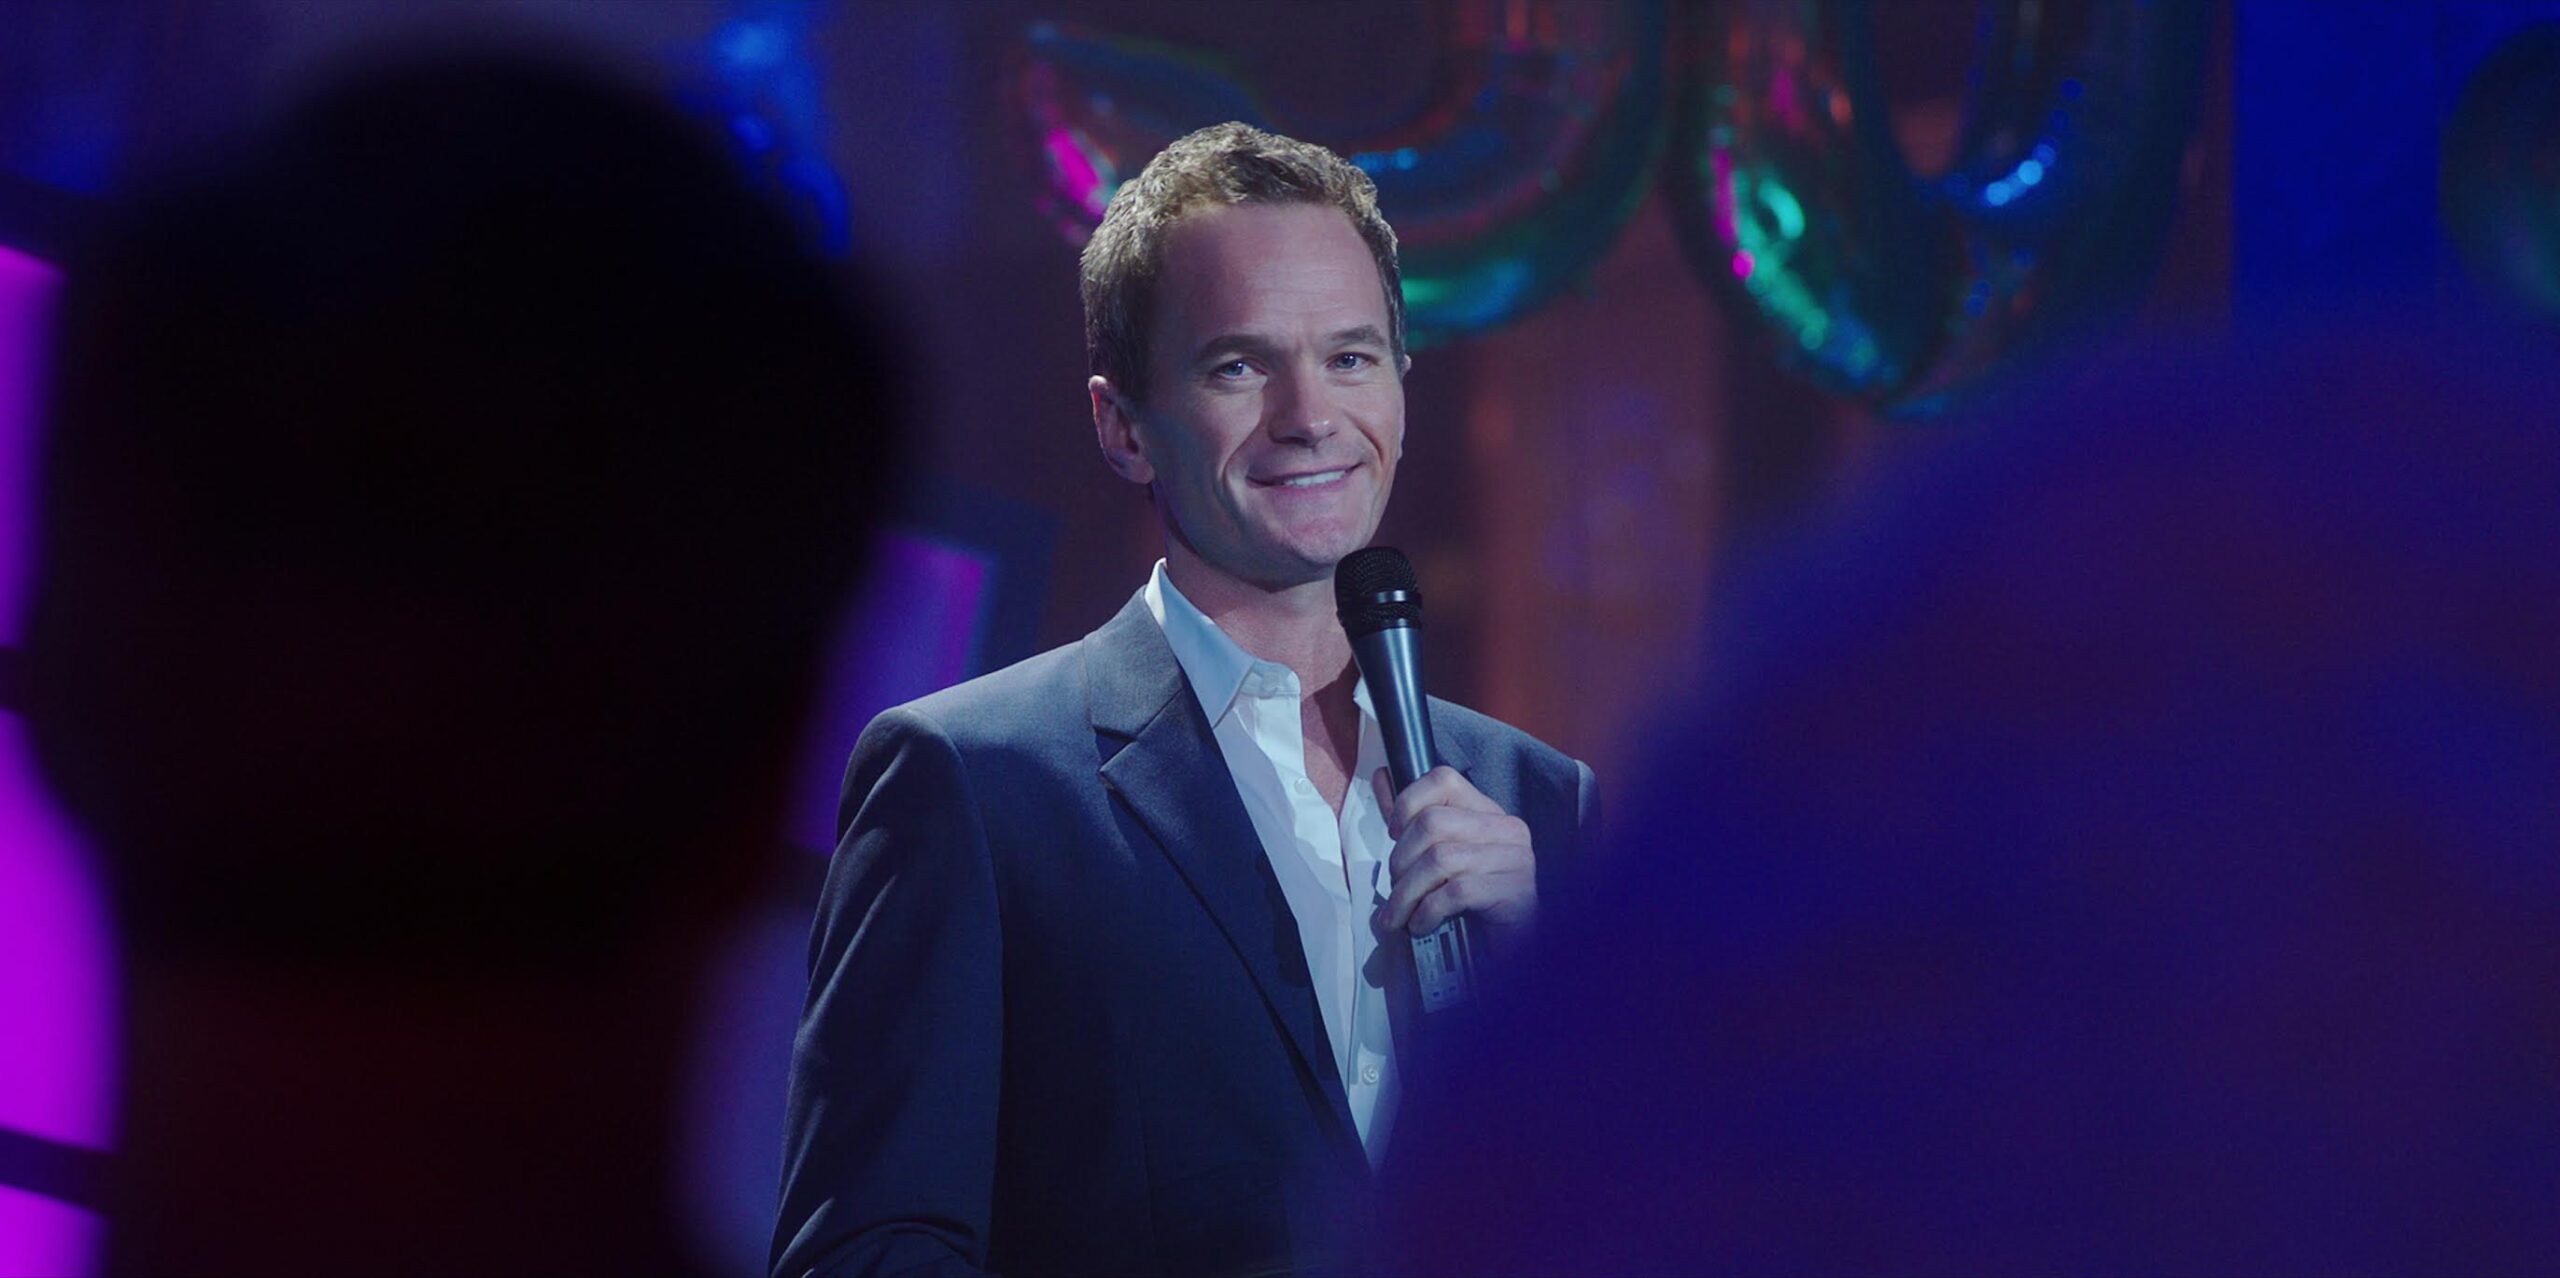 Neil Patrick Harris as Michael Lawson in episode 101 of Uncoupled.